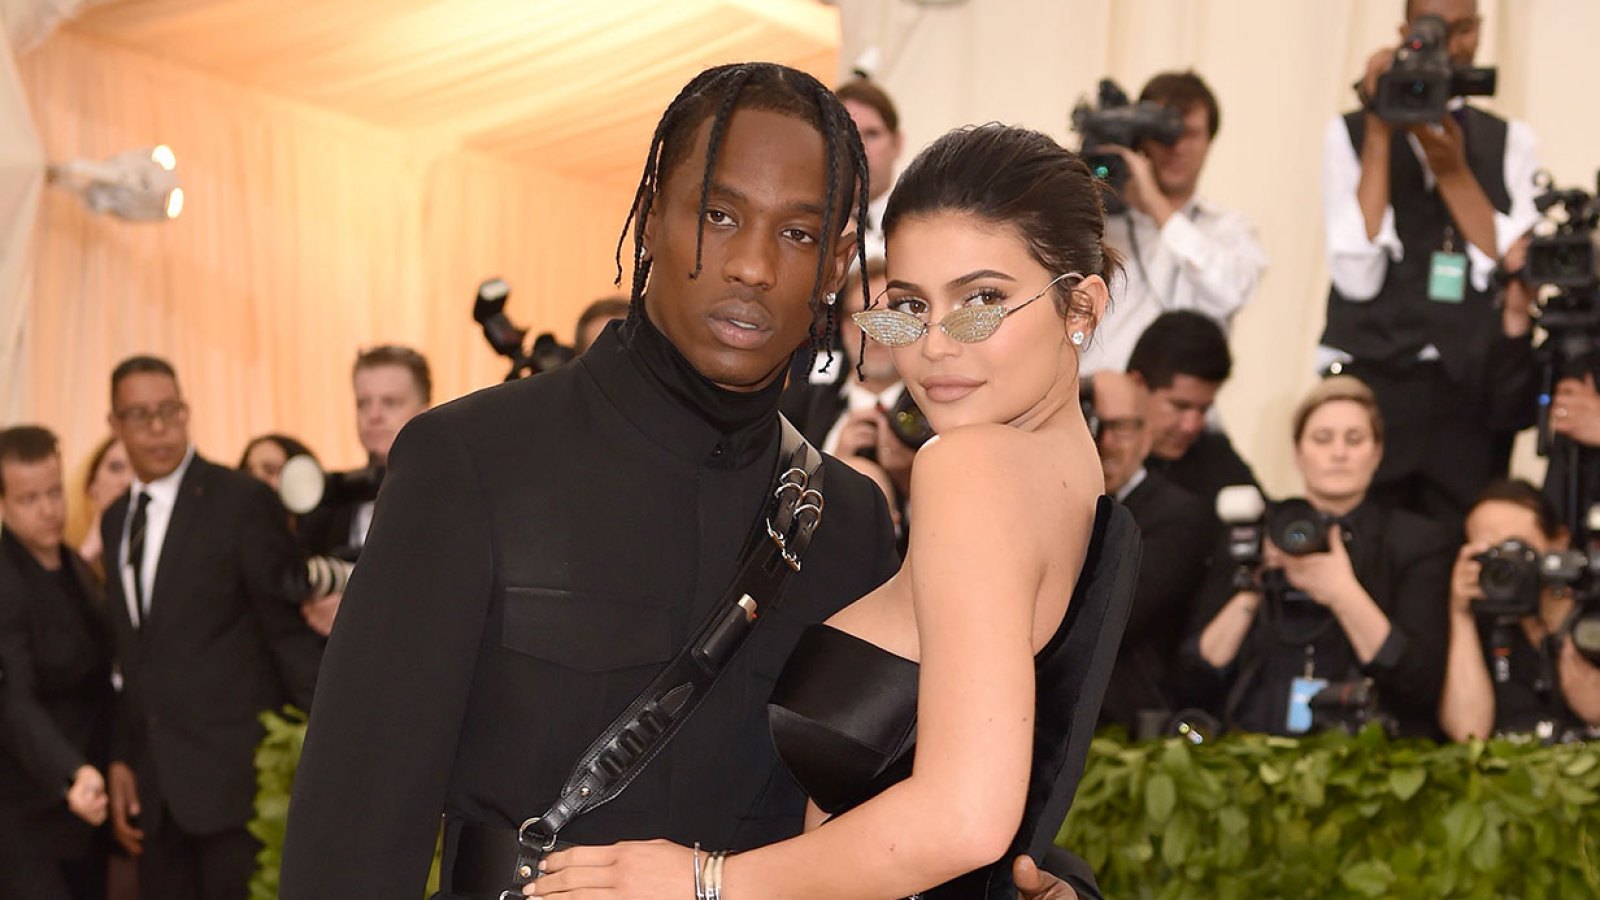 Kylie Jenner Is Living Her Best Life While on 'Baecation' With Travis Scott